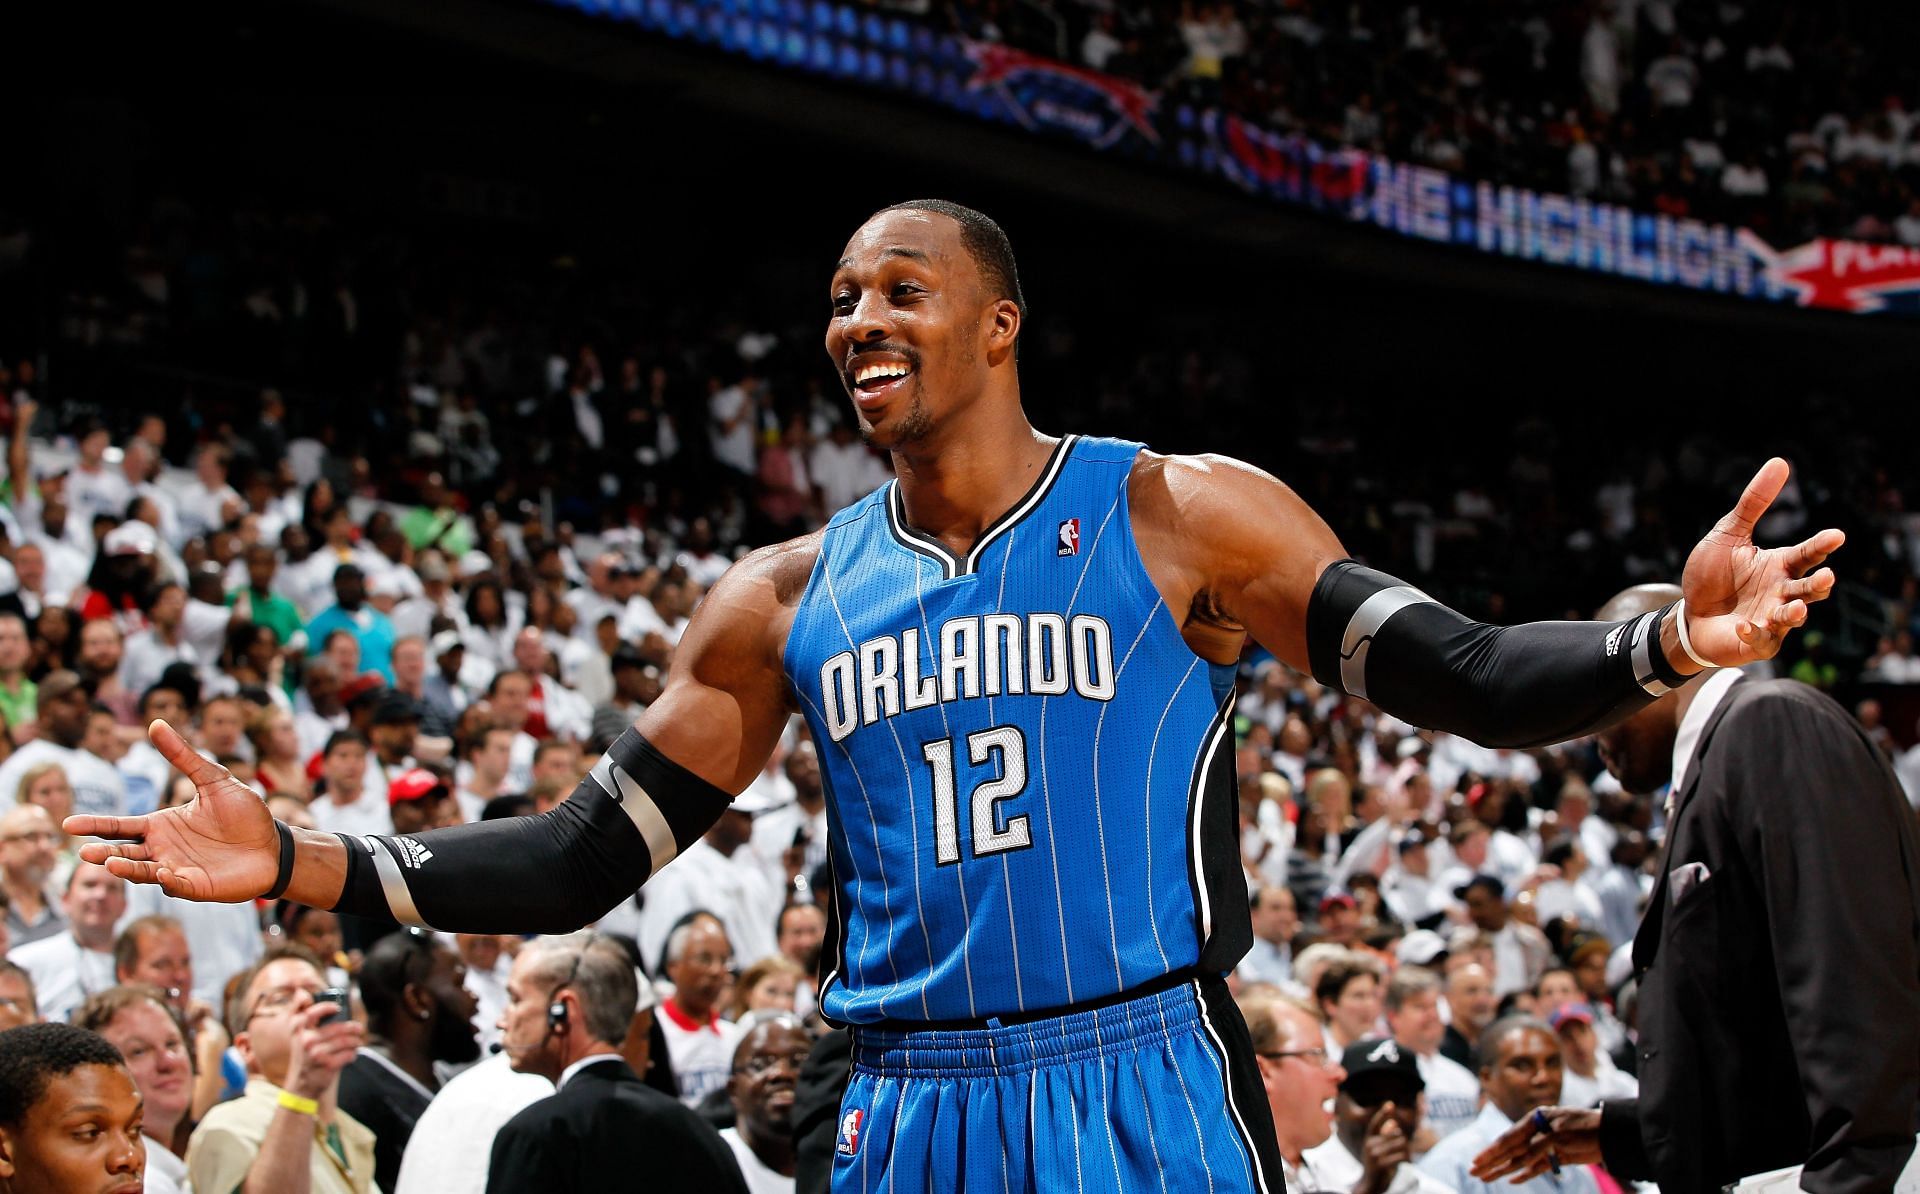 Dwight Howard played for the Orlando Magic for eight seasons